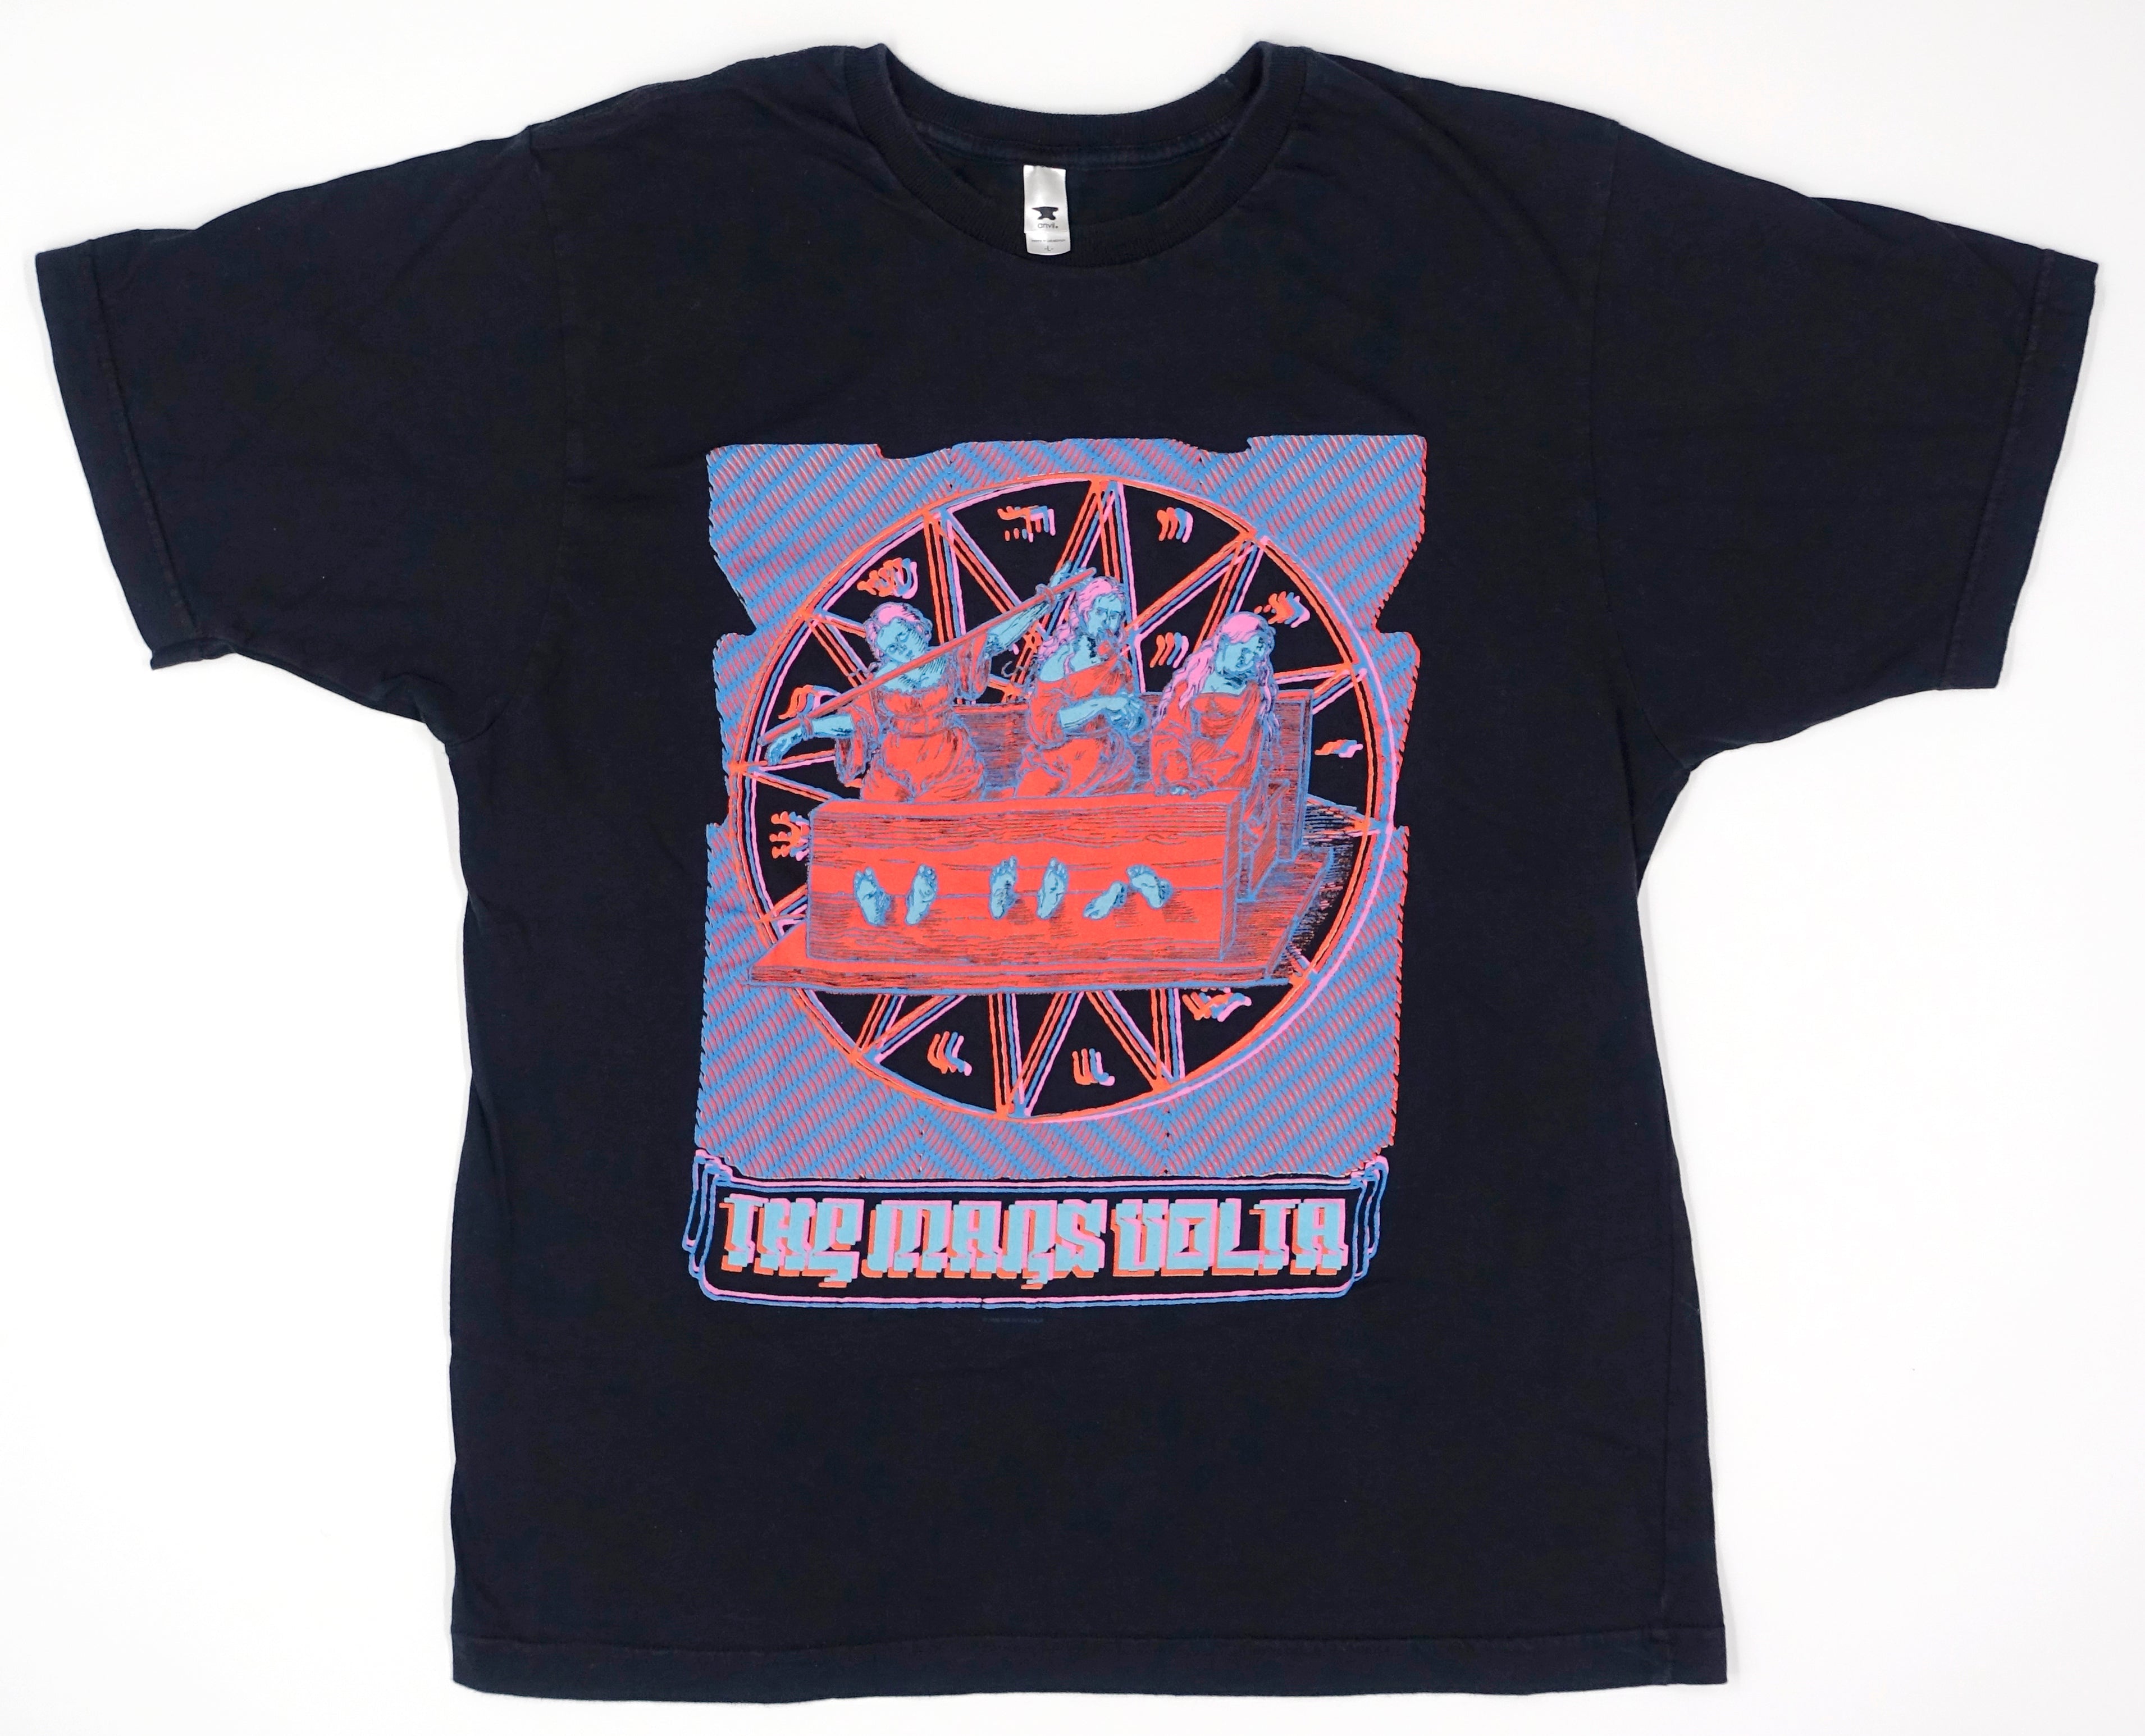 the Mars Volta – Women in the Gallows Tour Shirt Size Large